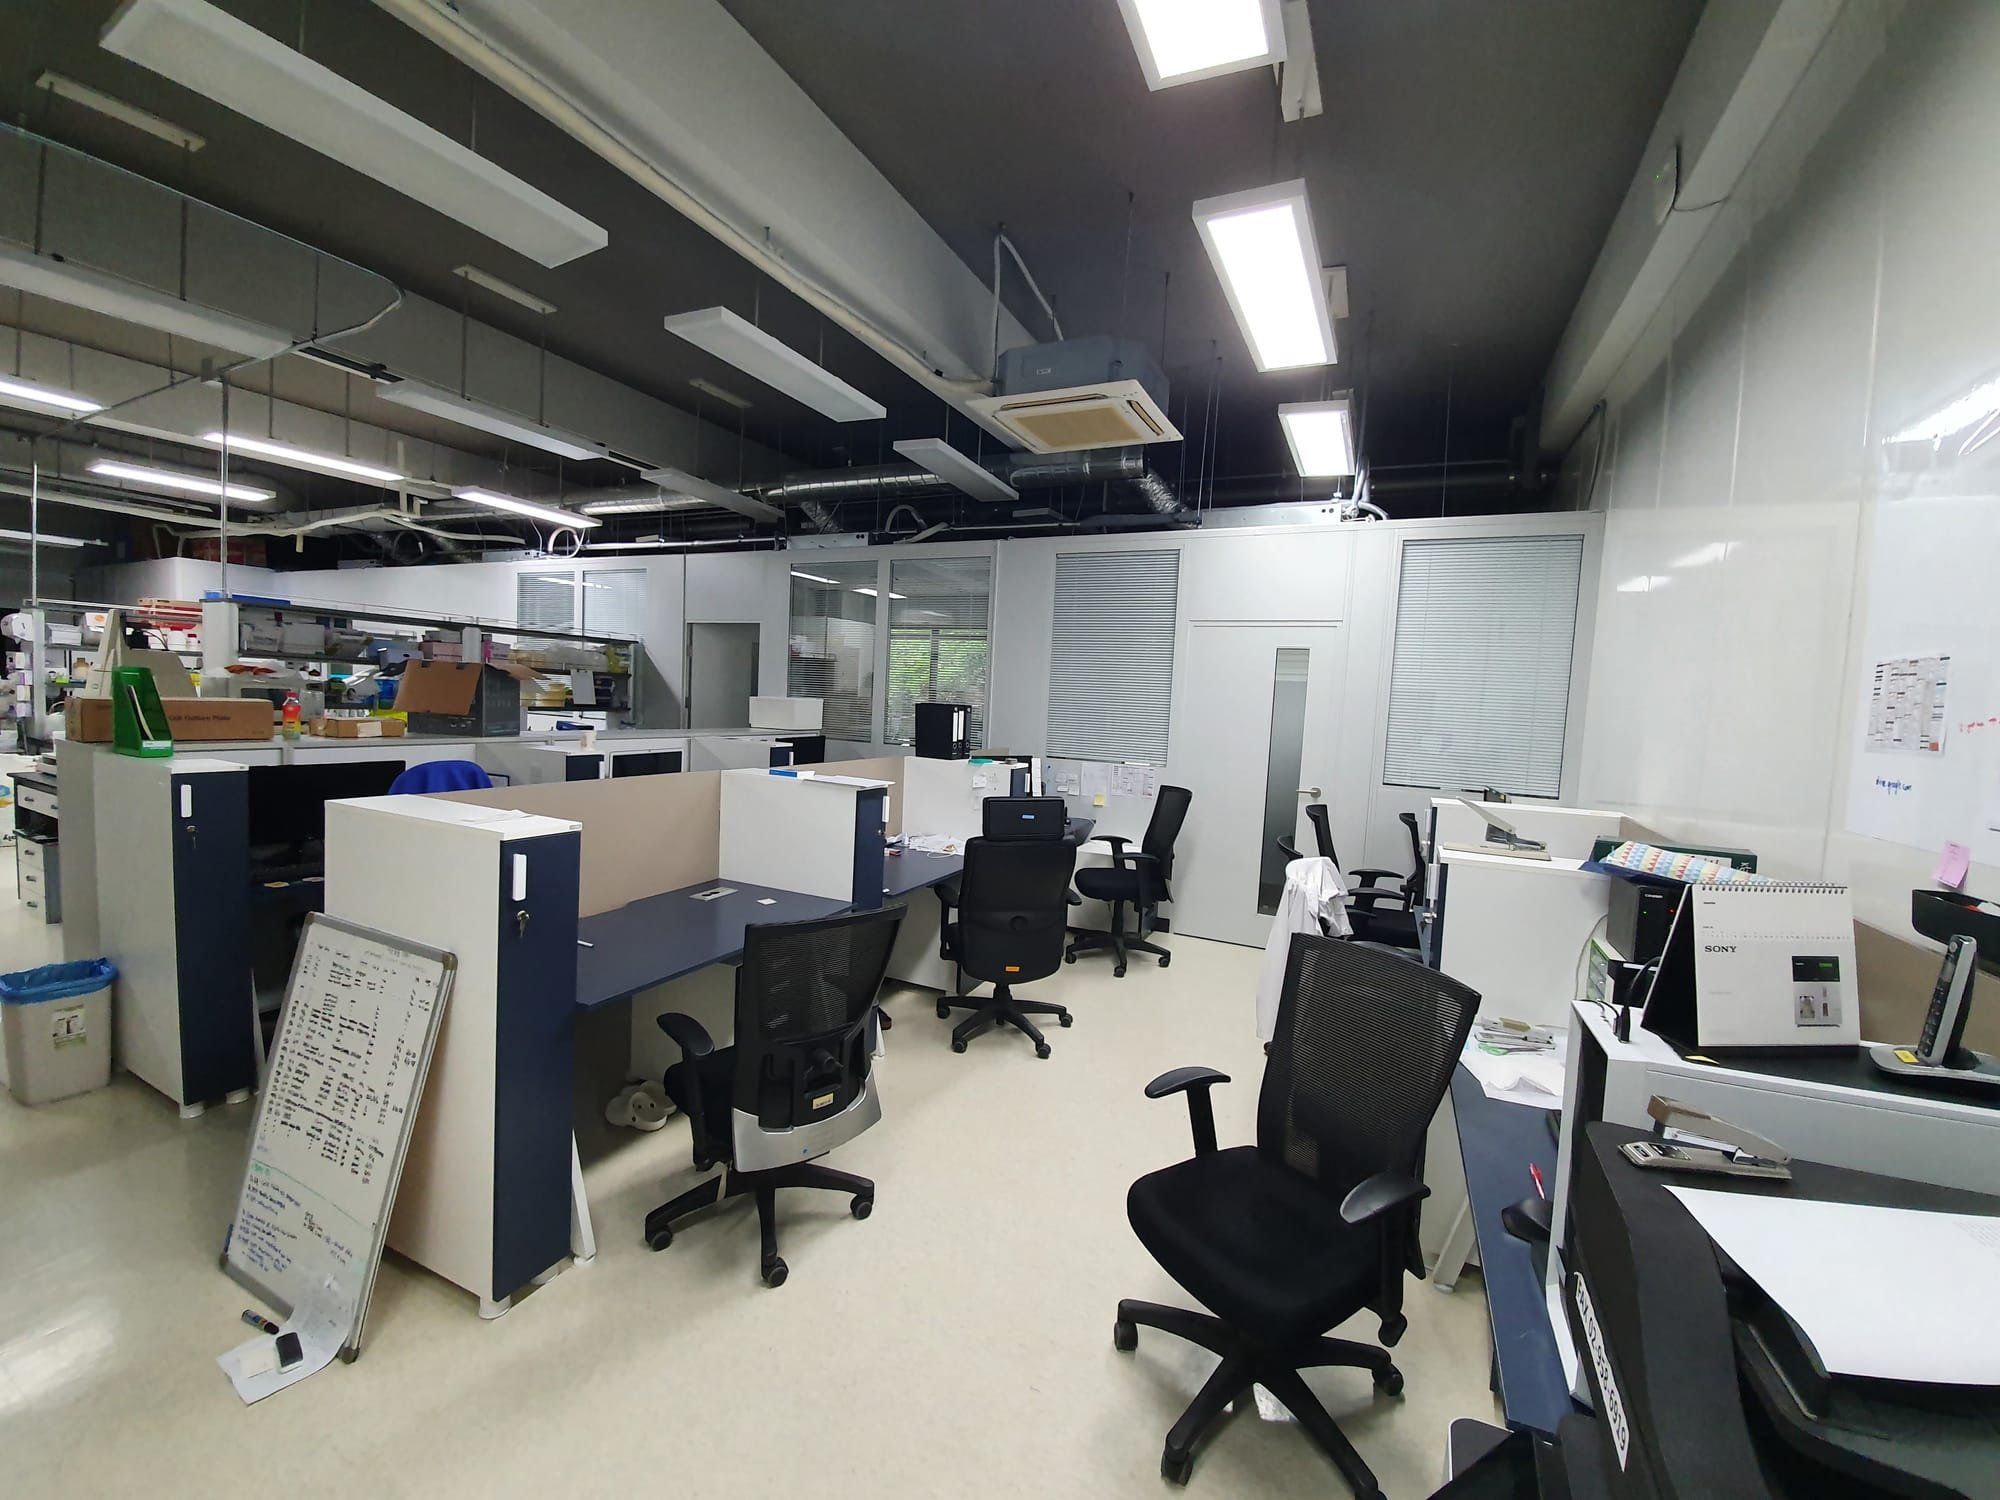 Space for students and post-docs